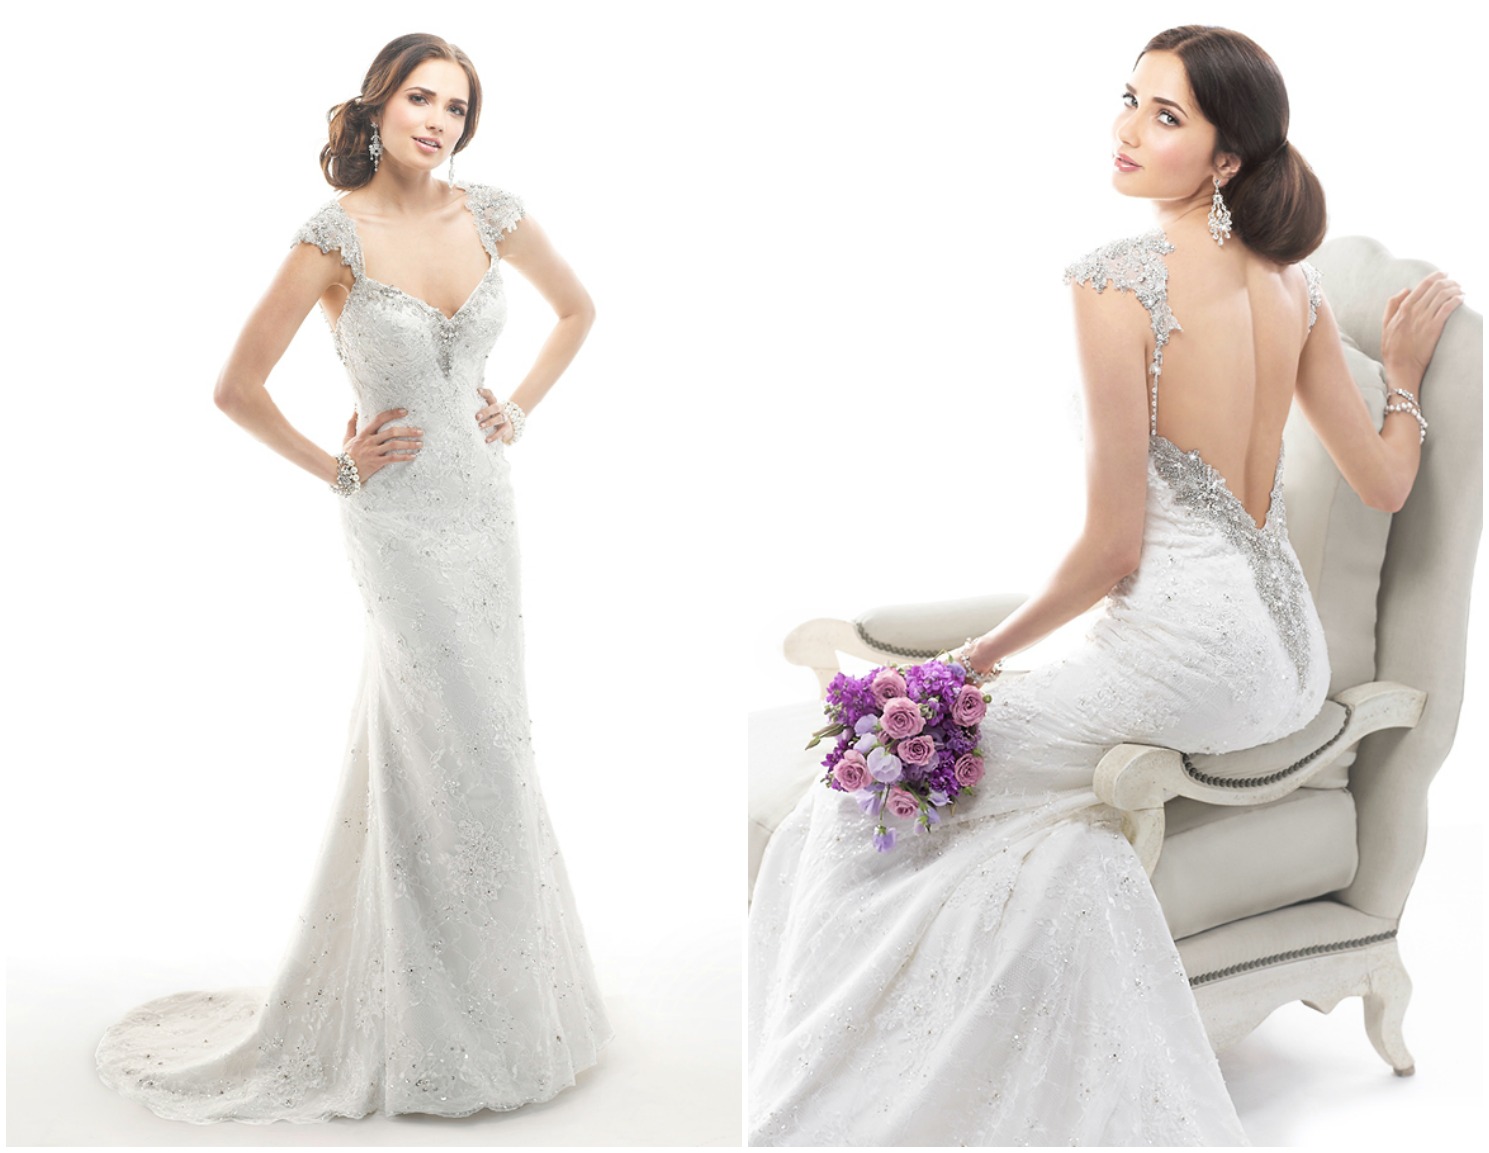 <a href="http://www.maggiesottero.com/dress.aspx?style=4MS884" target="_blank">Maggie Sottero</a>